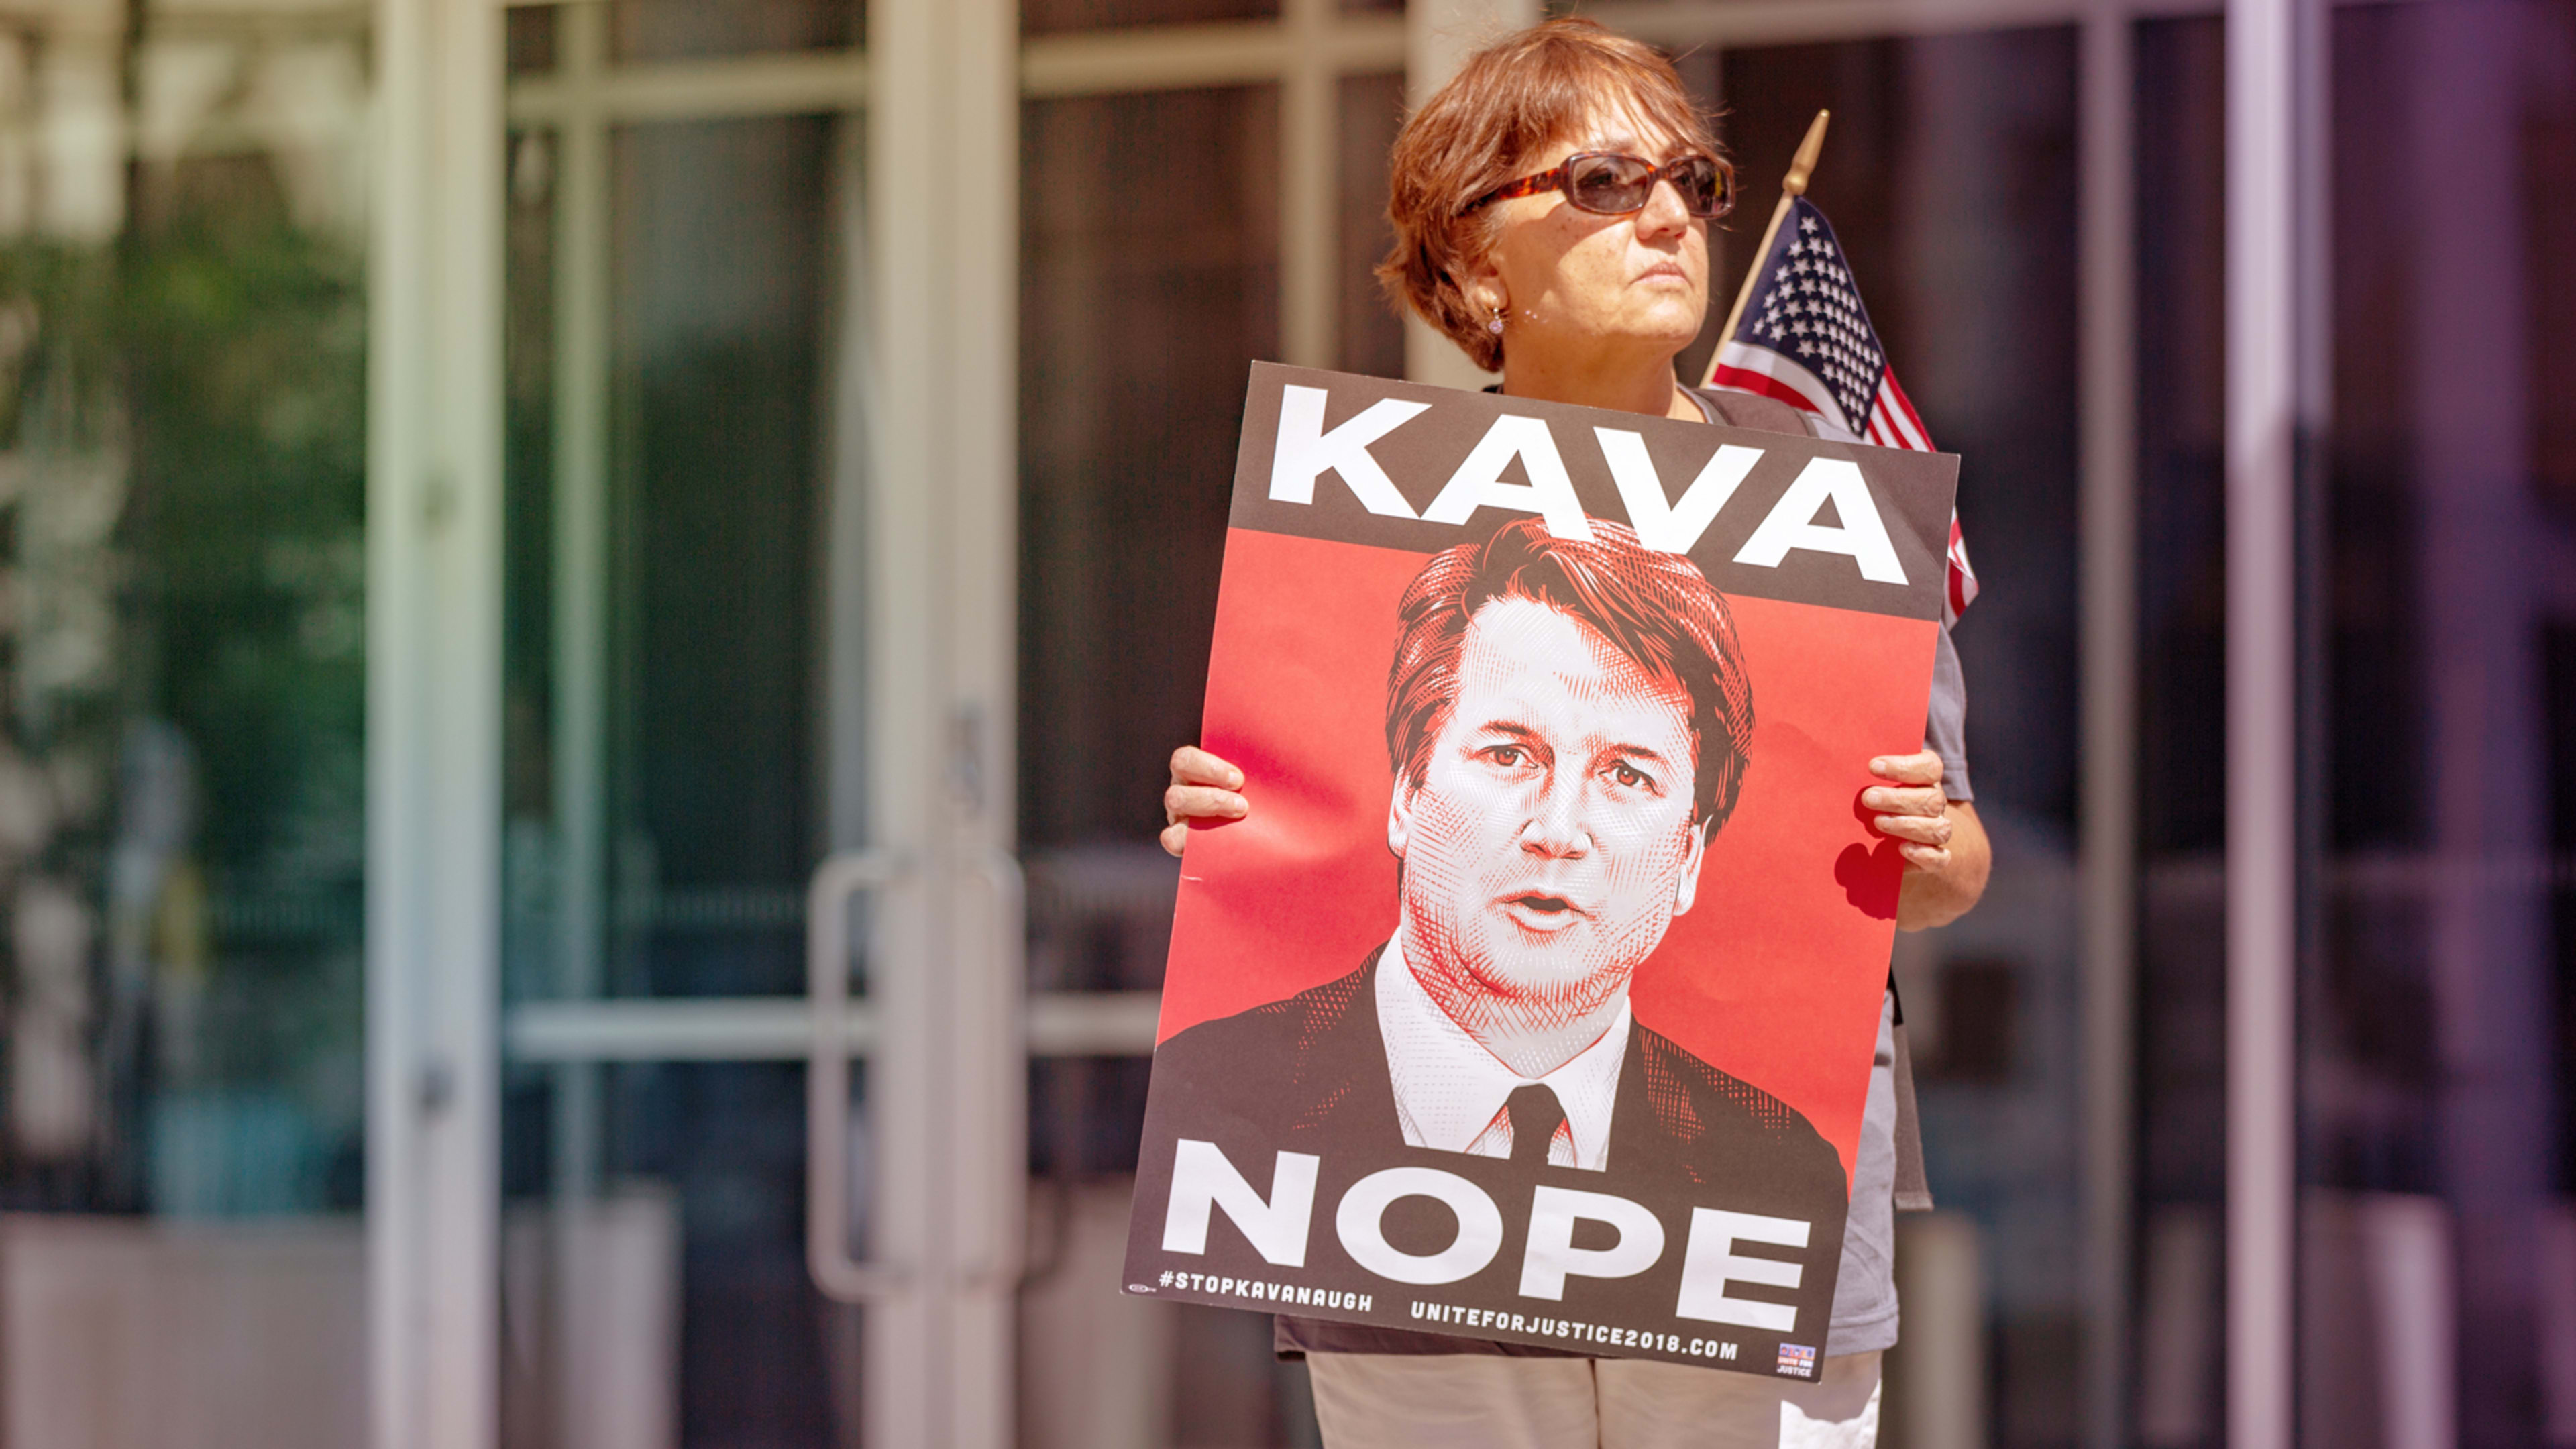 Report: Brett Kavanaugh accused of sexual misconduct in the 1980s